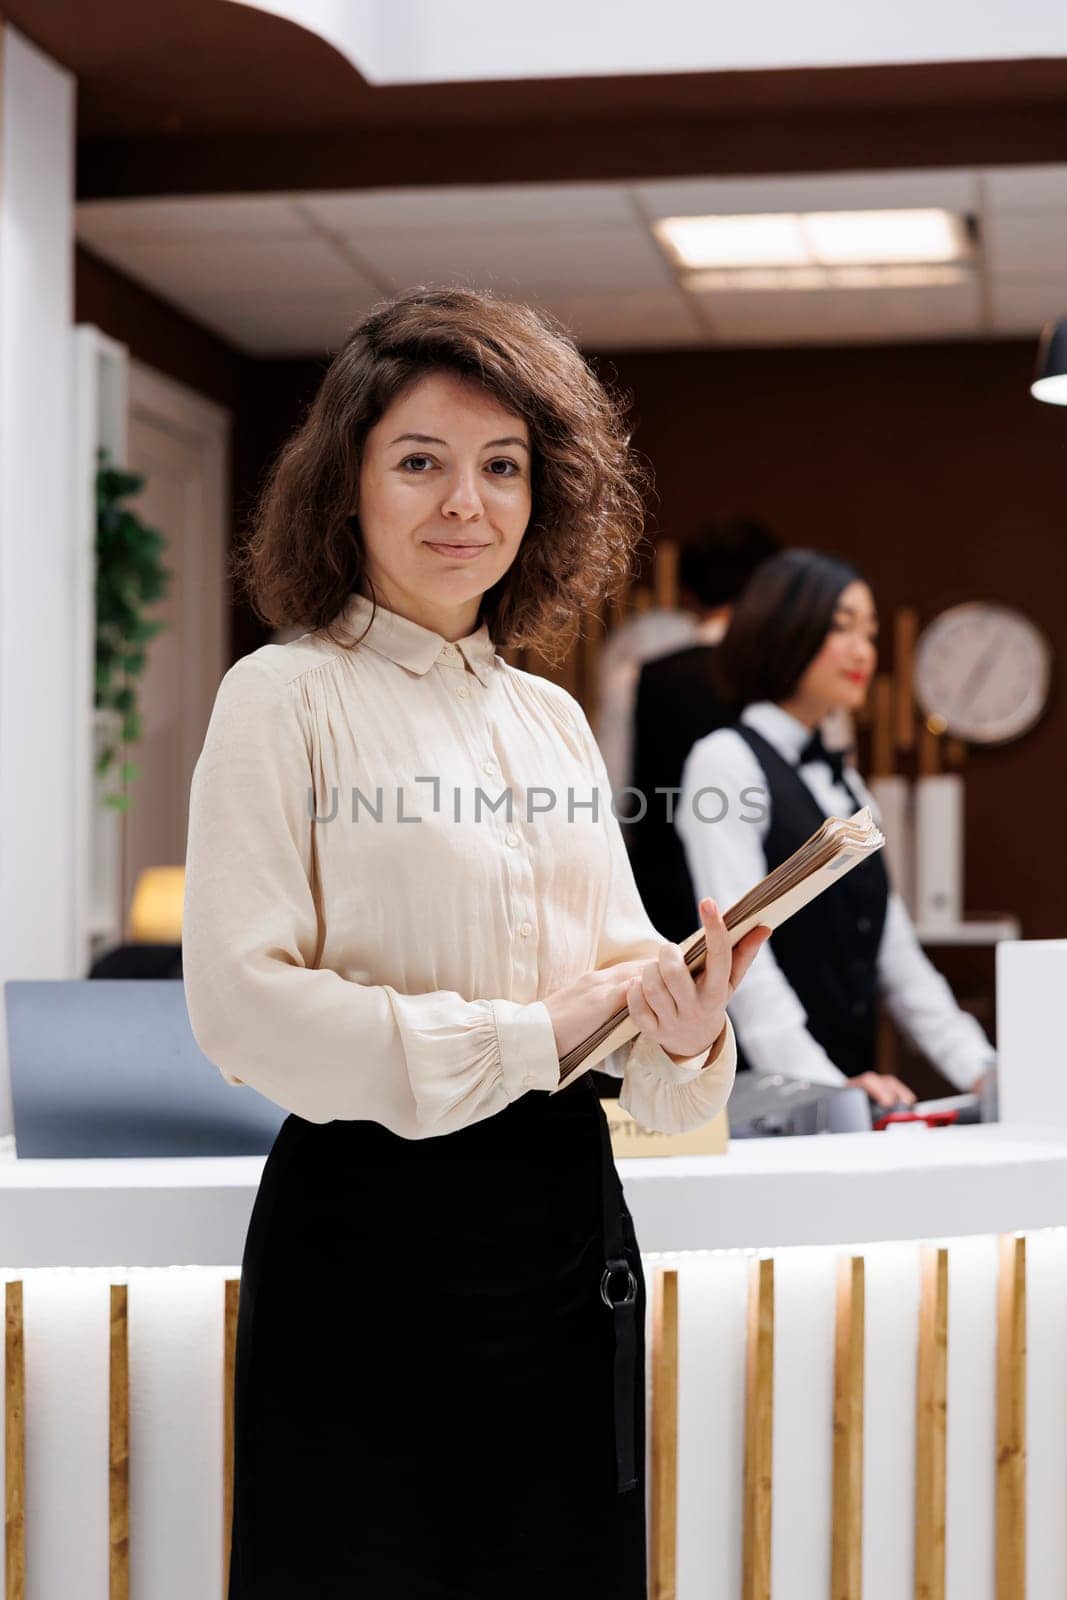 Administrator carrying record files and standing near front desk in hotel lobby, verifying service as manager. Female supervisor checking booking register and welcoming people.